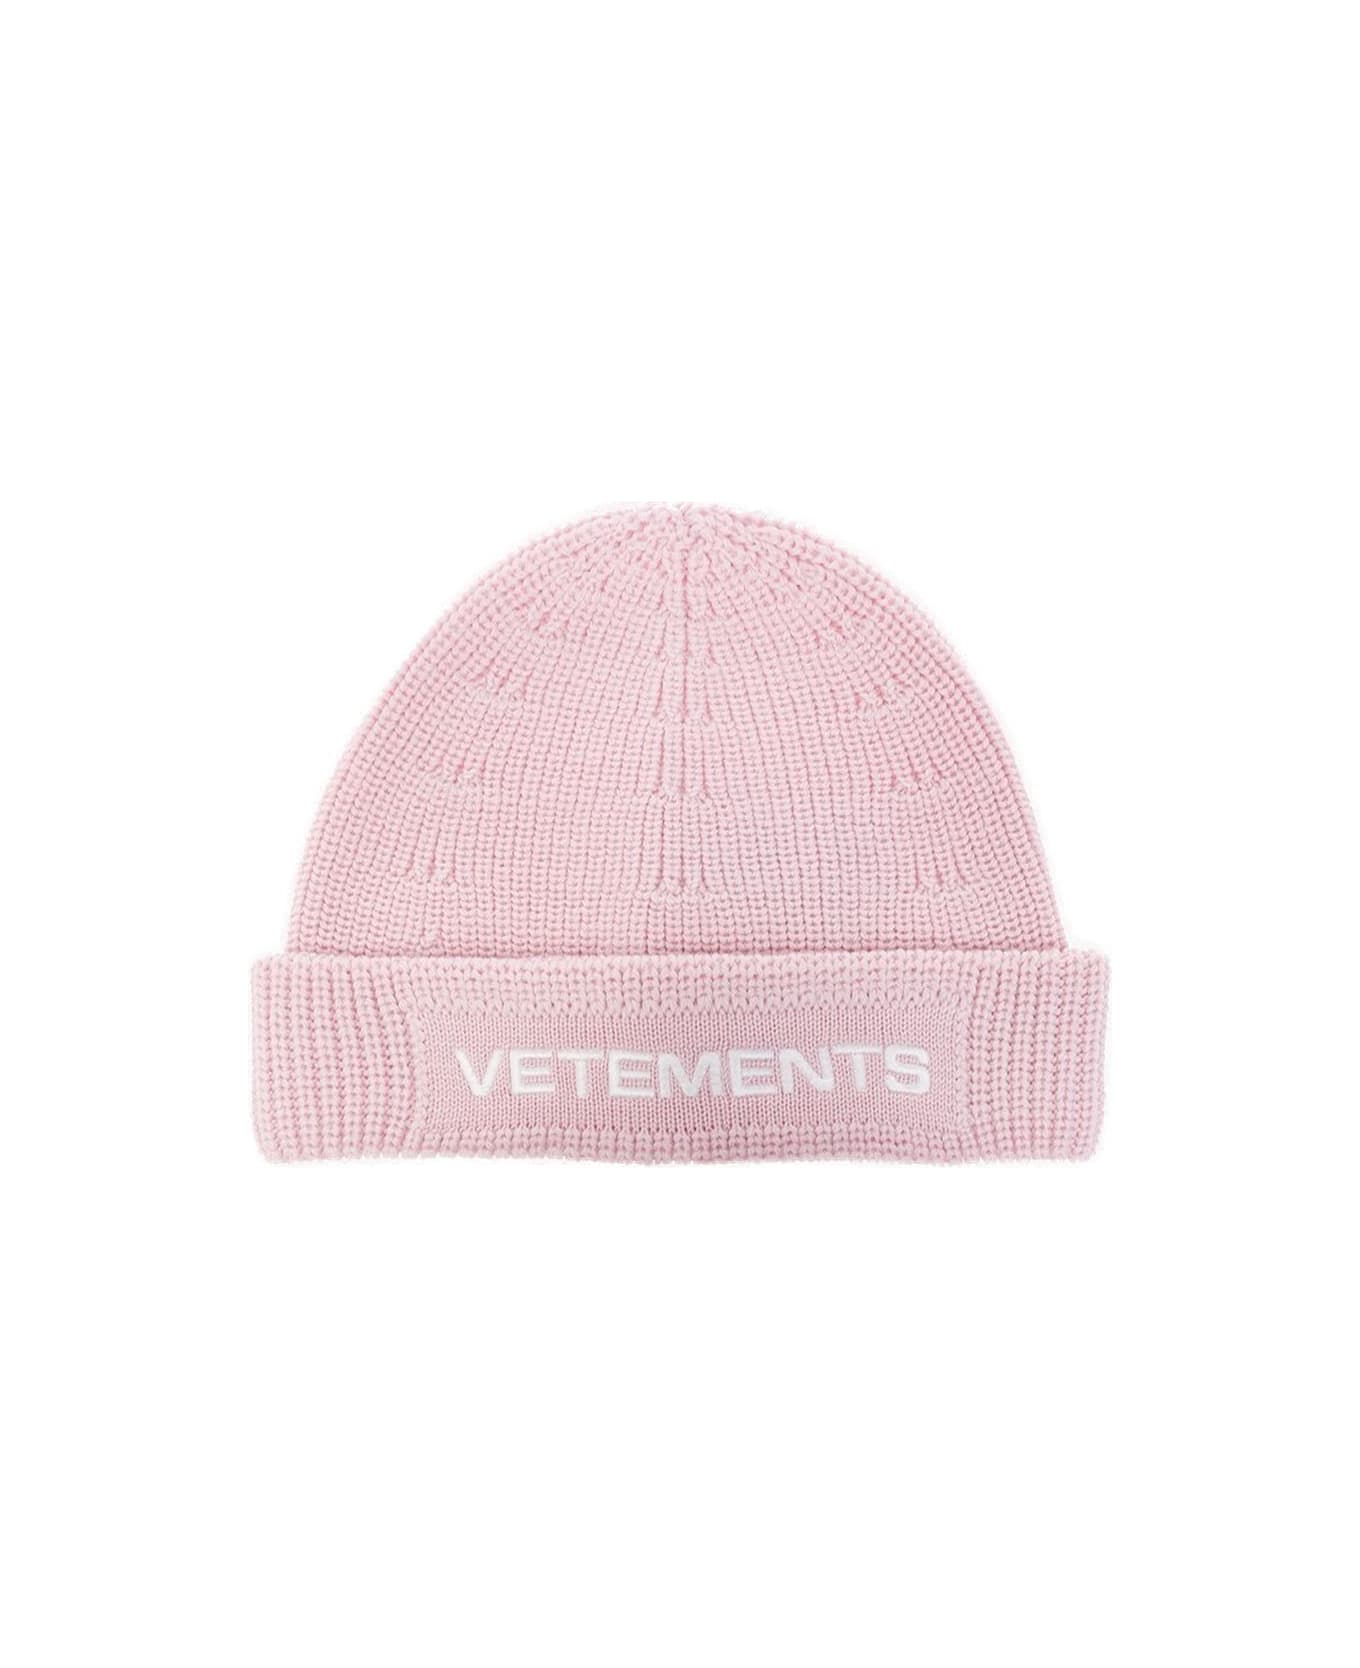 VETEMENTS Logo Embroidered Beanie - PINK